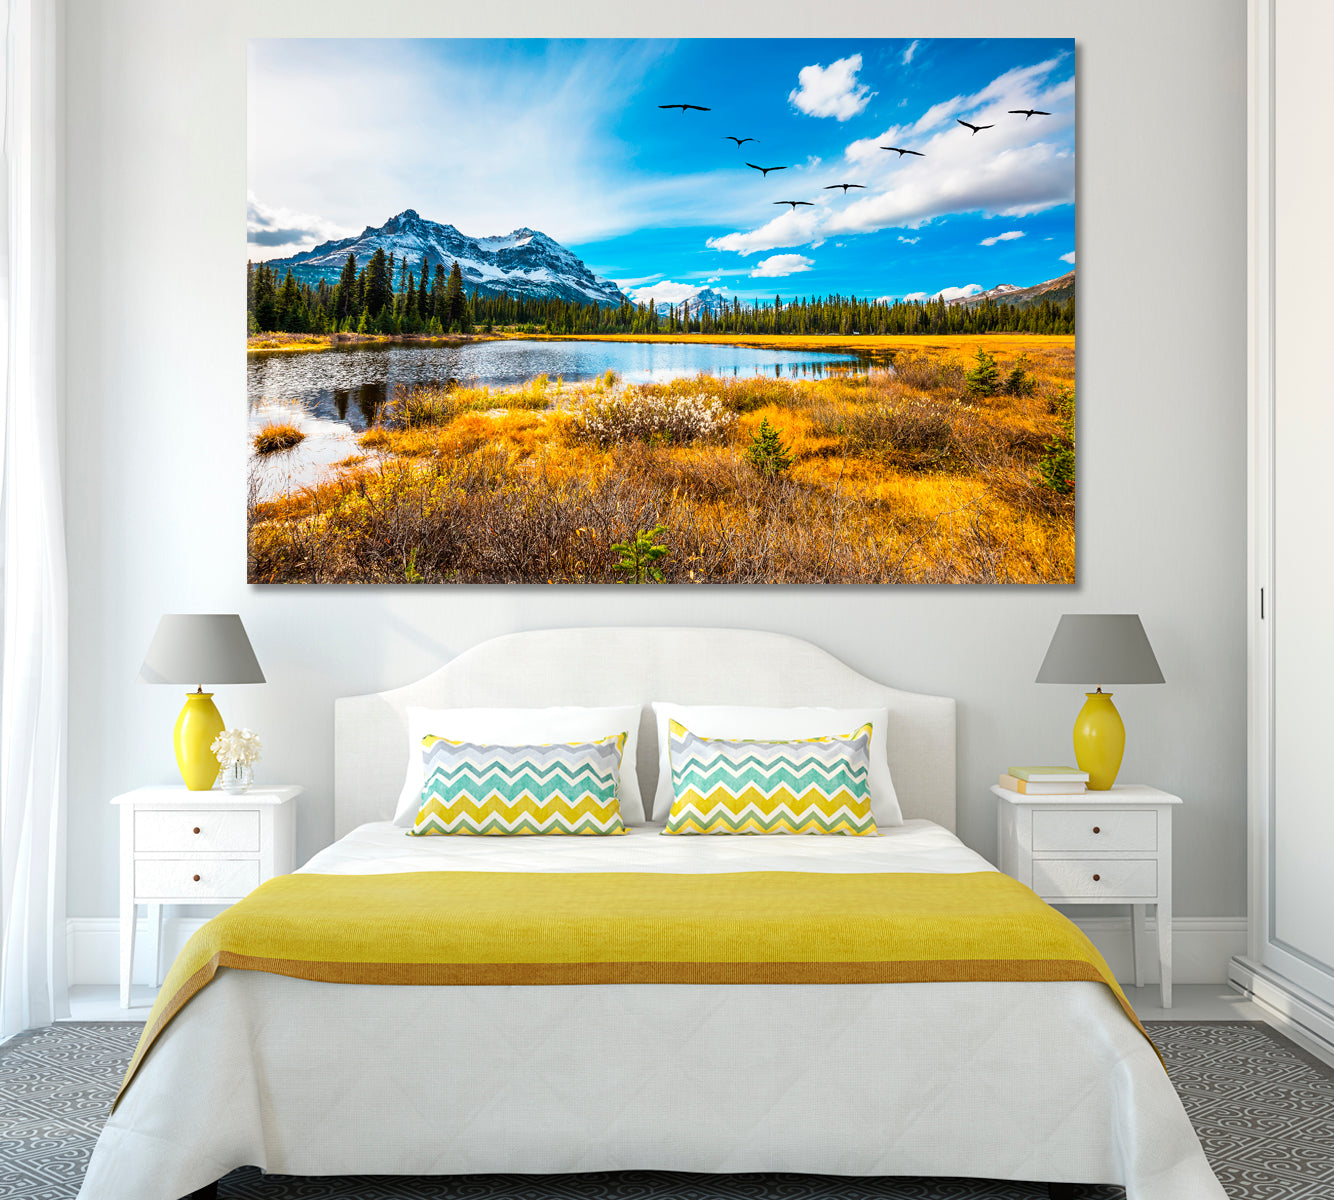 Autumn Valley in Canadian Rockies Landscape Canvas Print ArtLexy 1 Panel 24"x16" inches 